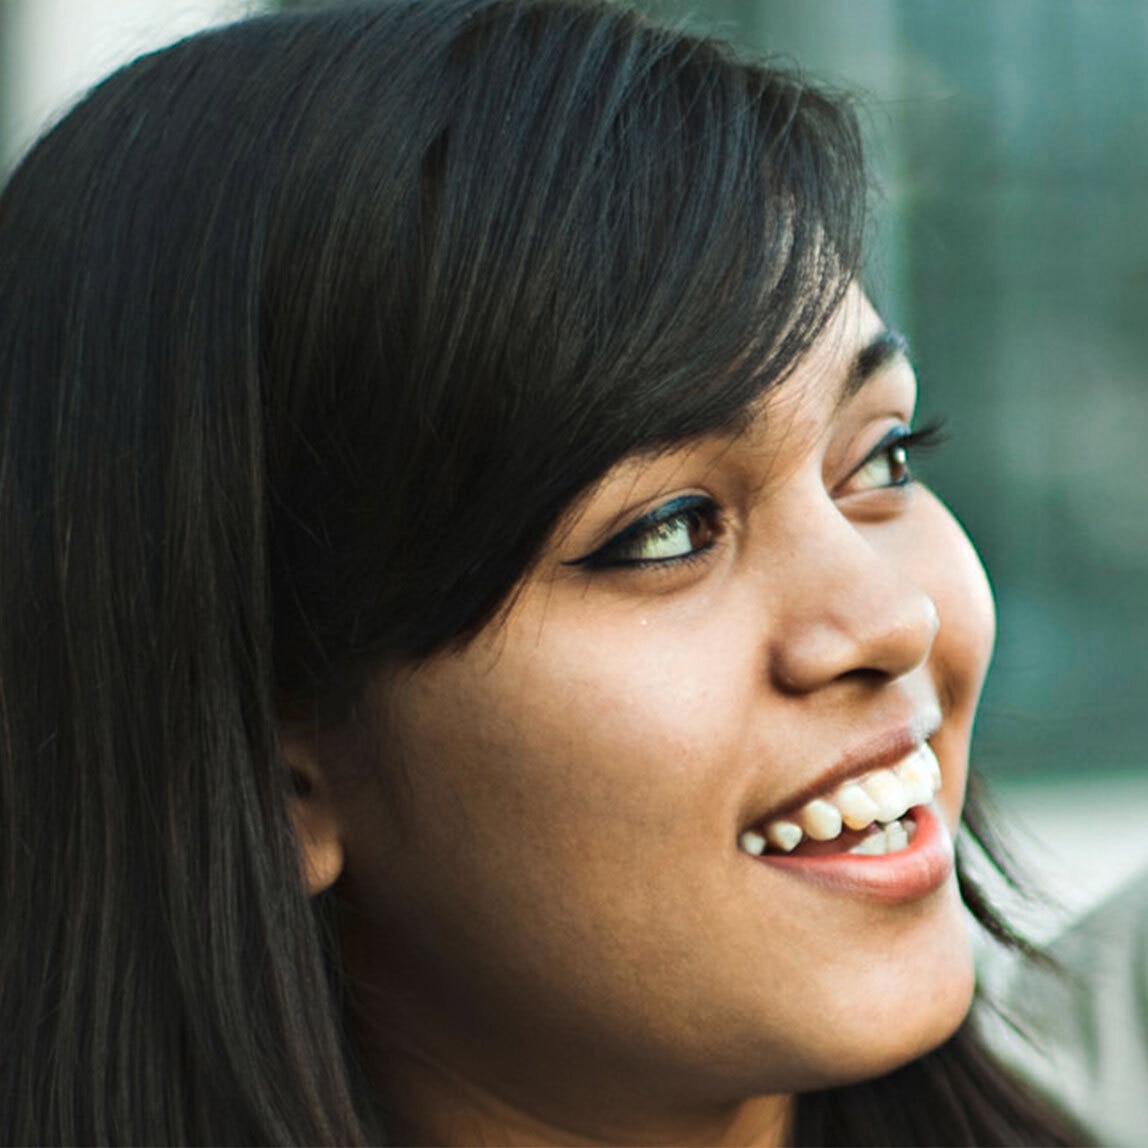 Side view of a smiling woman's face. Her hair is thick, straight and black. 